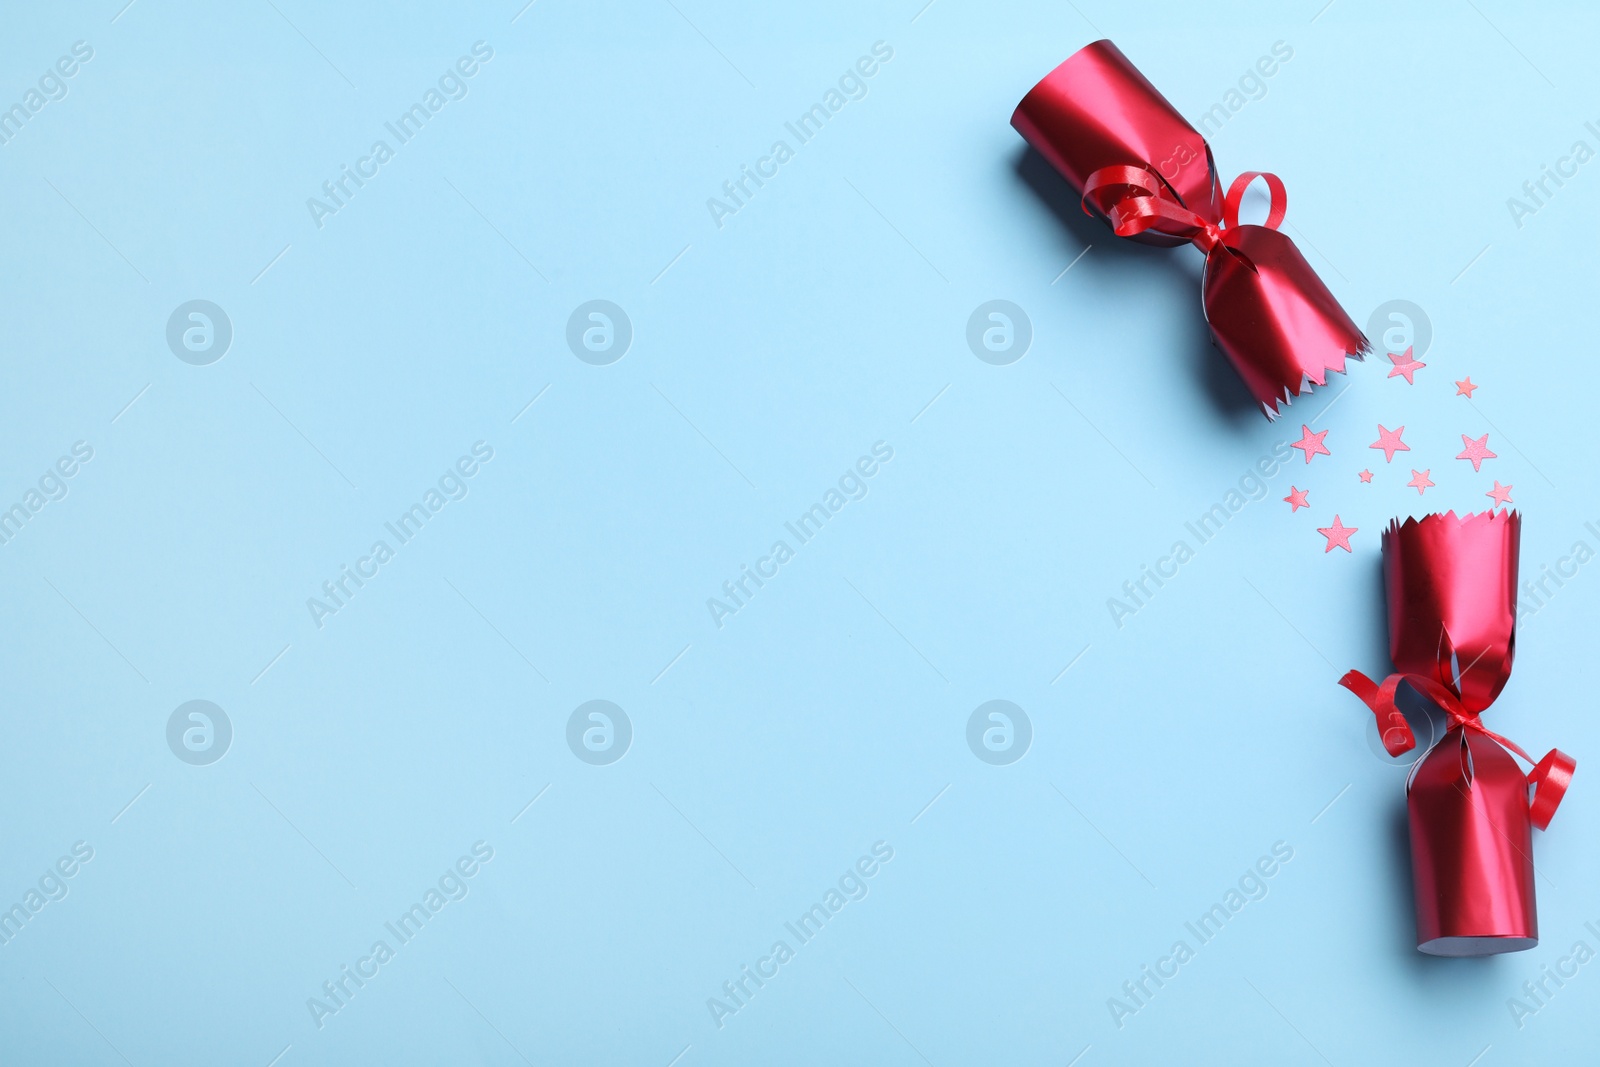 Photo of Open red Christmas cracker with shiny confetti on light blue background, top view. Space for text